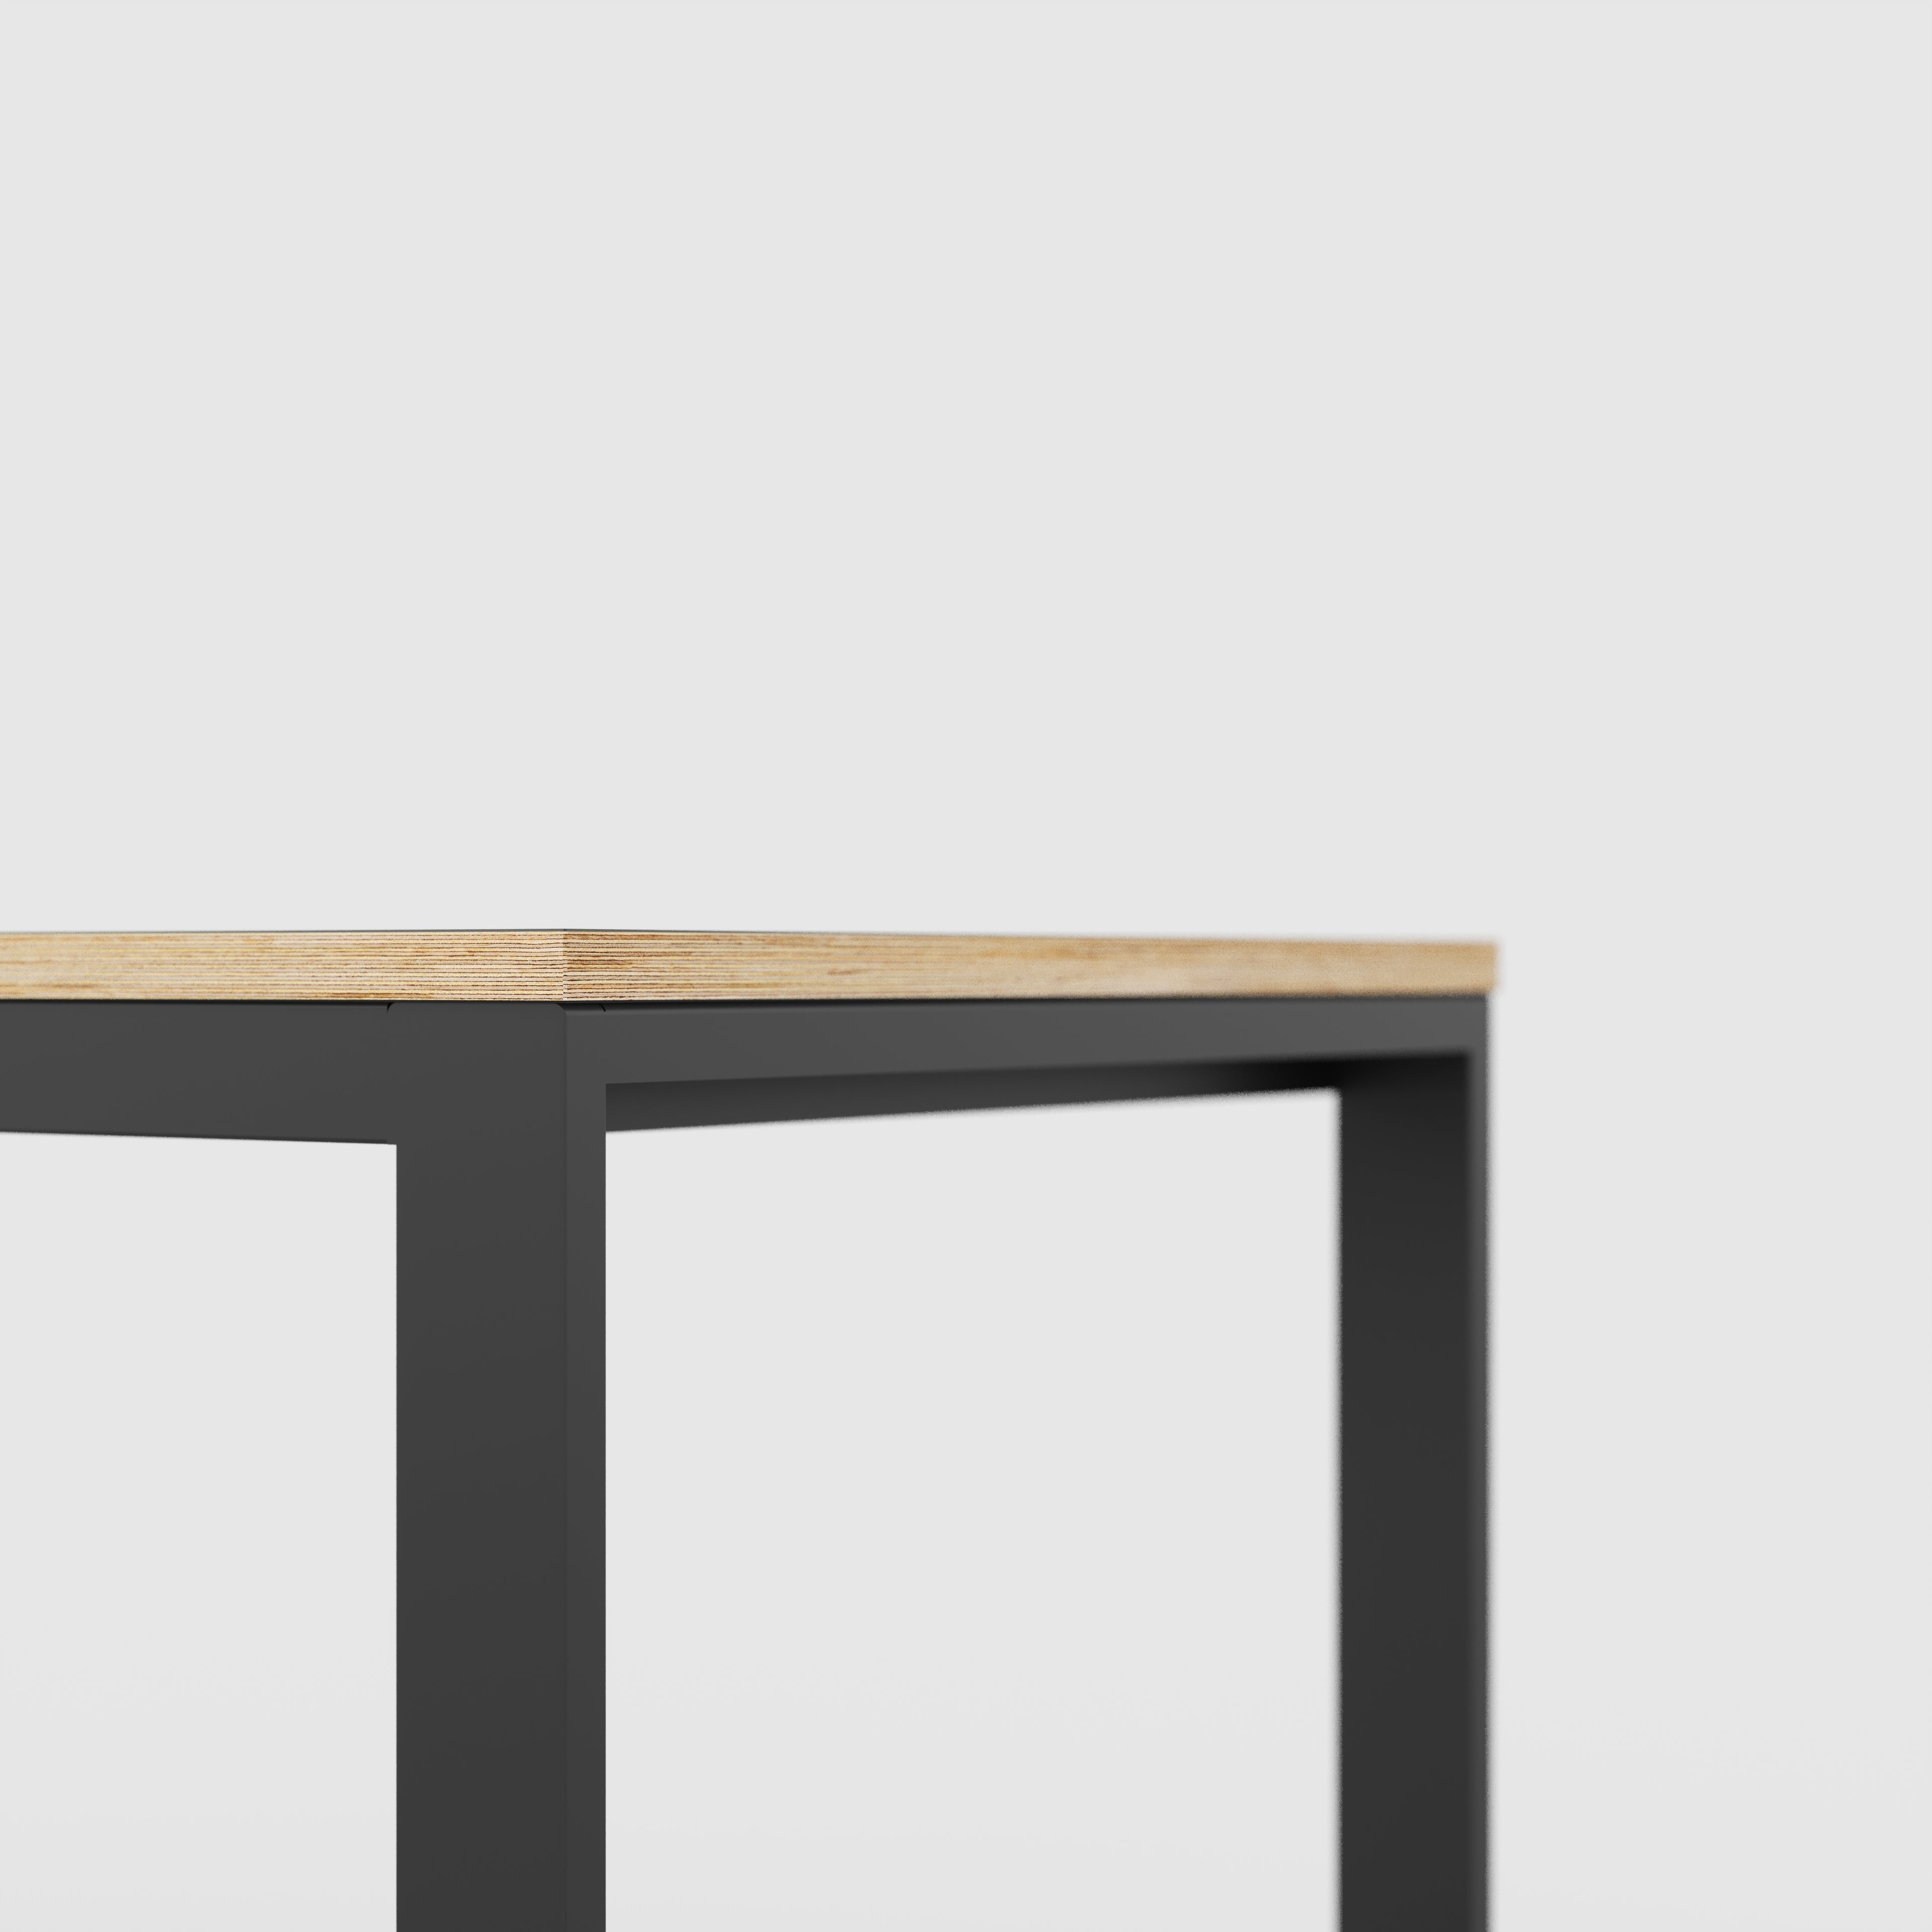 Table with Black Industrial Frame - Formica Levante Orange - 1800(w) x 745(d) x 735(h)